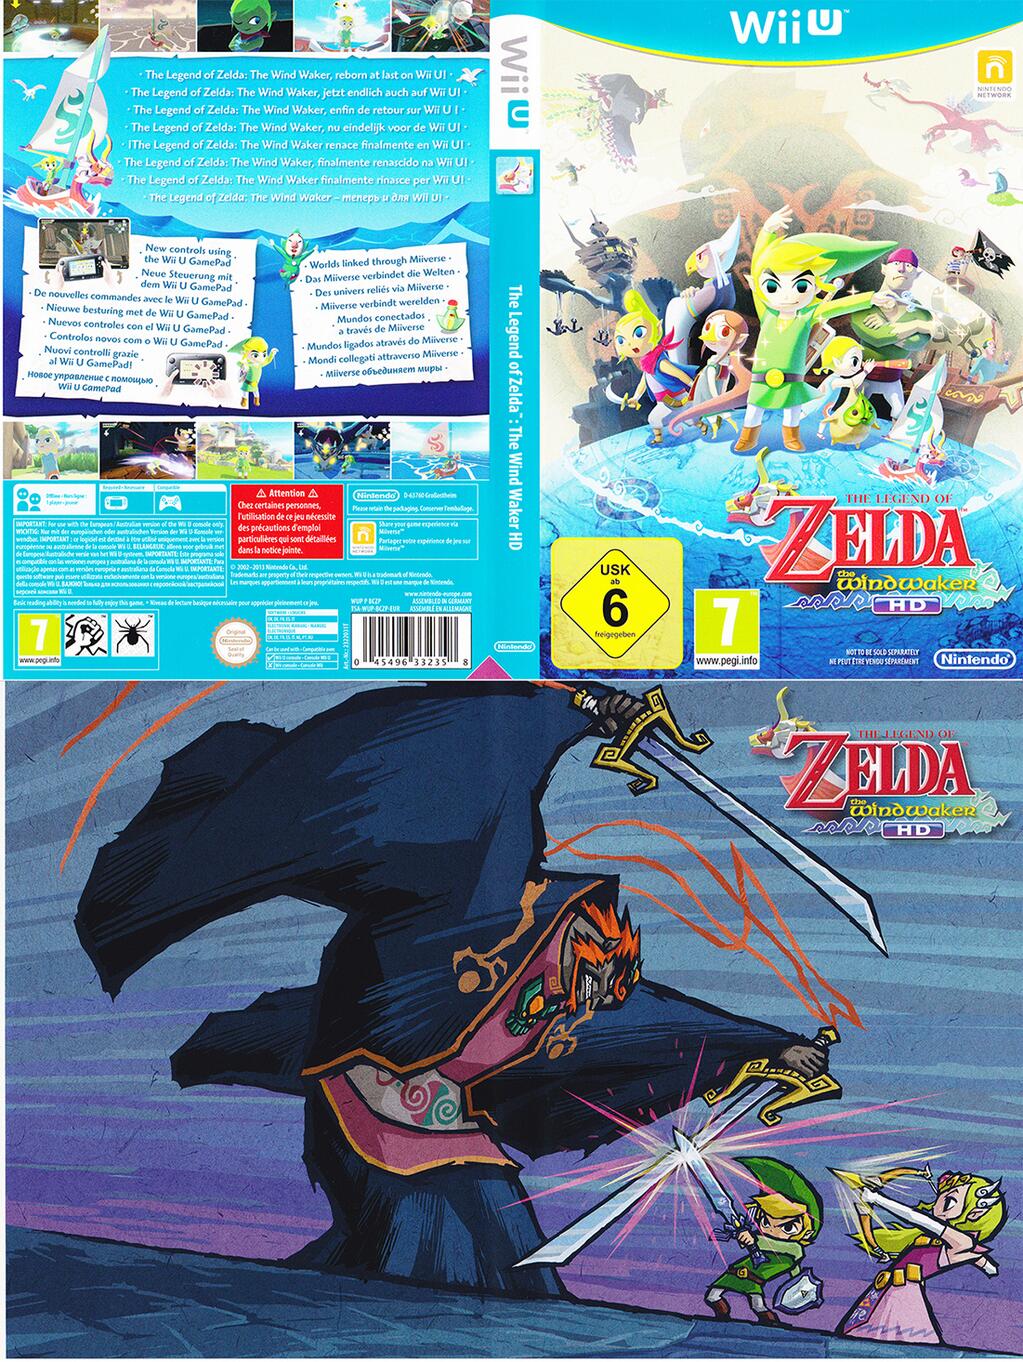 Unboxing Legend of Zelda: The Wind Waker HD - Limited Edition